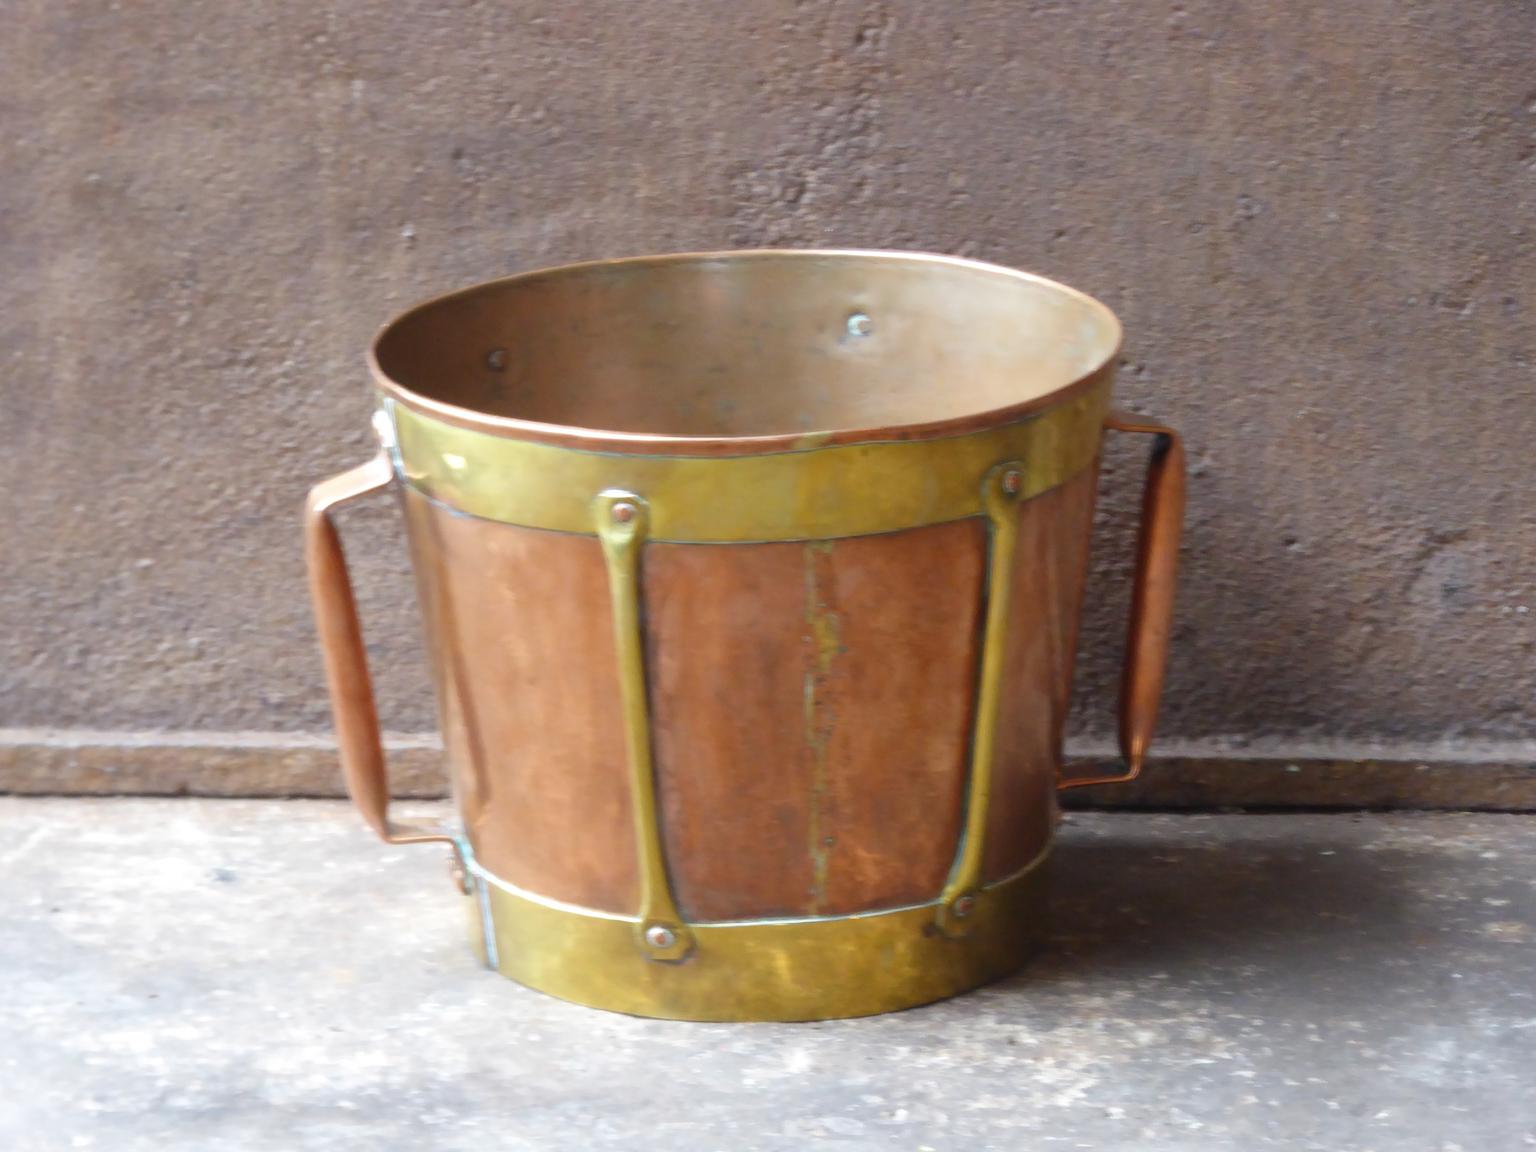 18th-19th century French neoclassical firewood basket made of copper and copper A socalled 'ferrat' from the Auvergne, France. Old copper container reinforced with a frame and adorned with brass bands with which the women went to fetch water. They